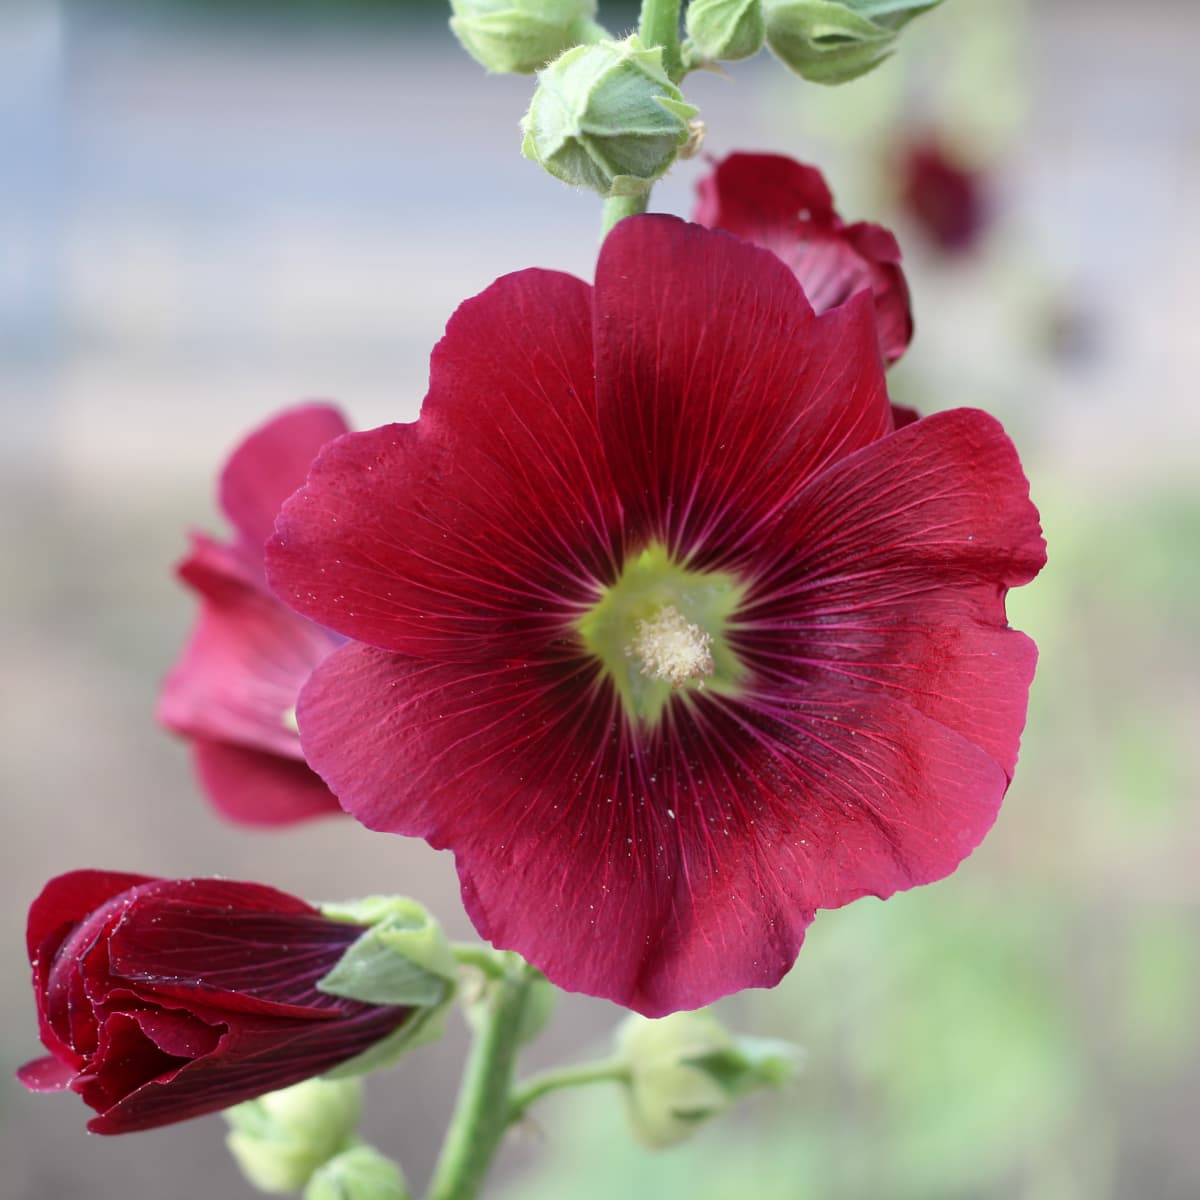 When to plant hollyhock seeds – for a spectacular show